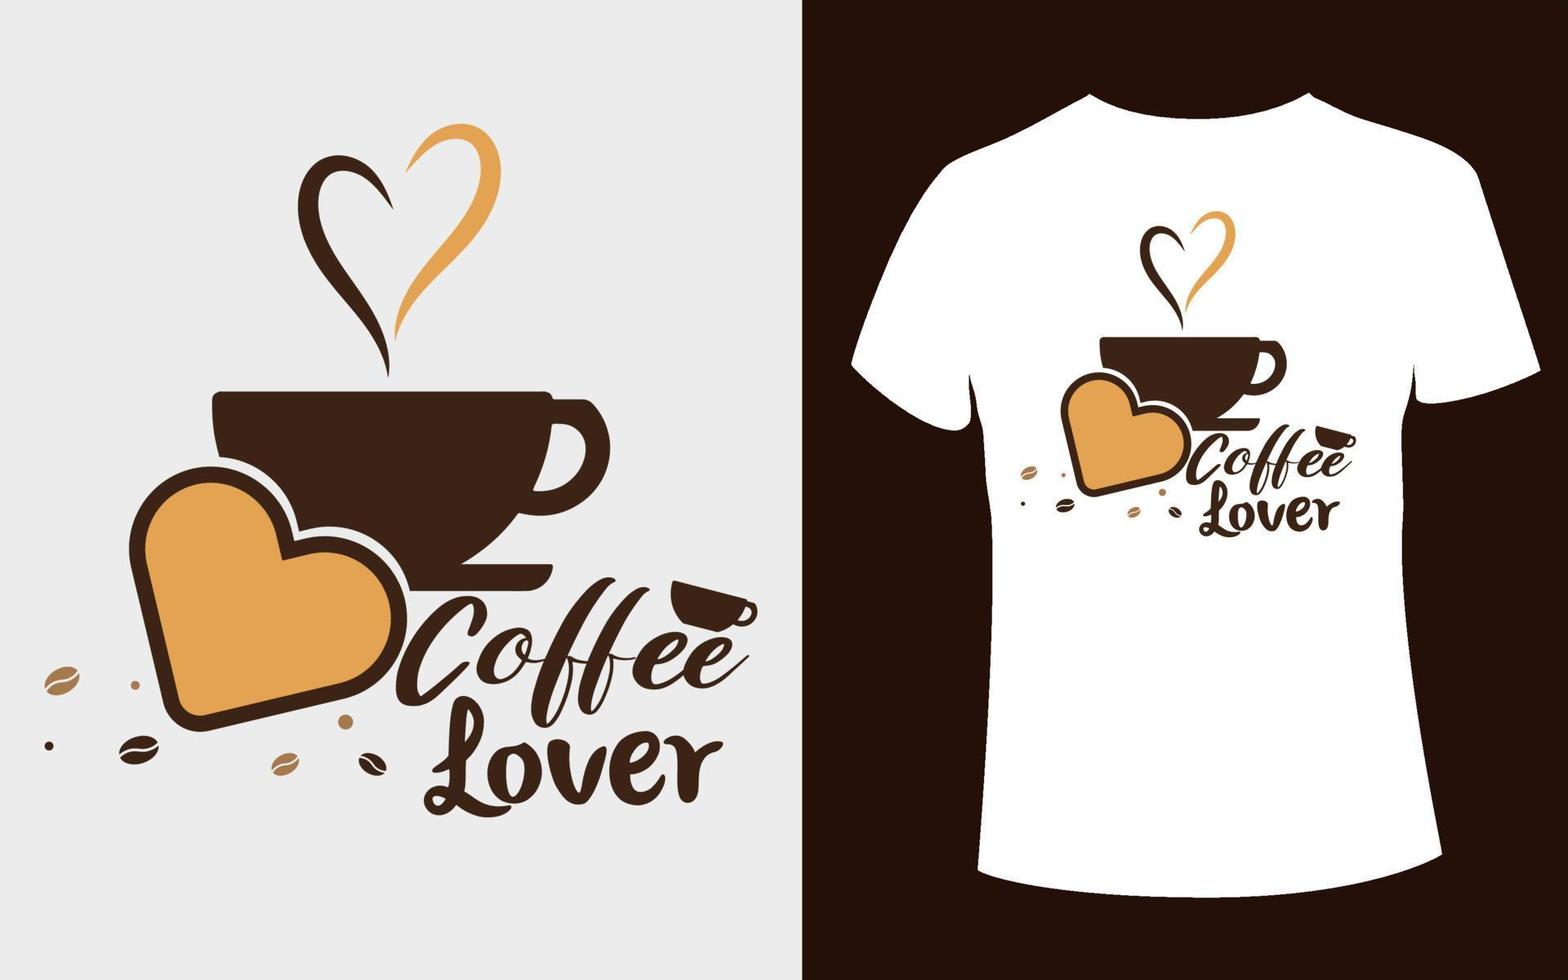 Coffee lover t-shirt design with coffee vector